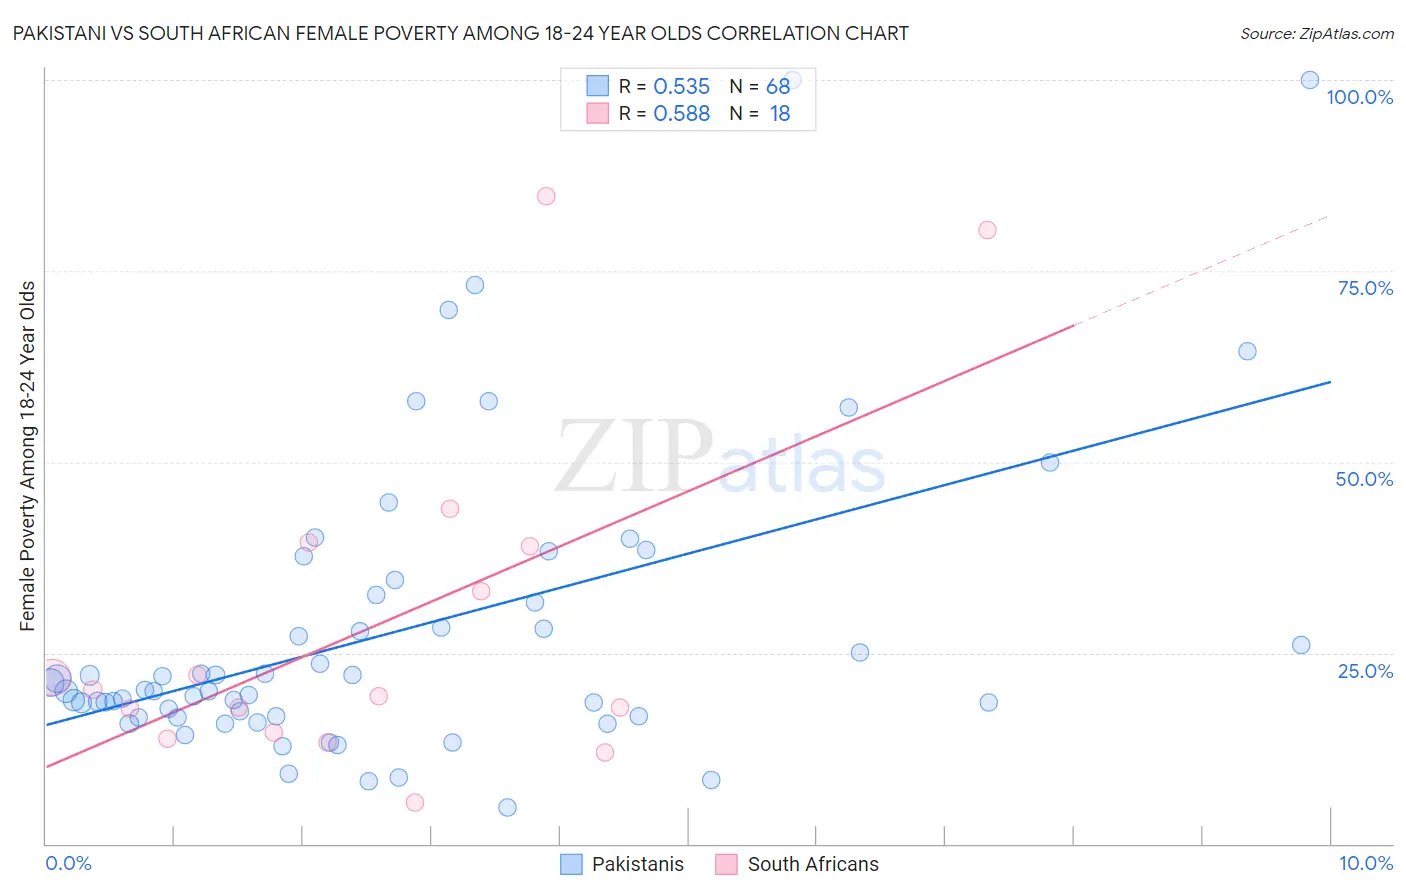 Pakistani vs South African Female Poverty Among 18-24 Year Olds